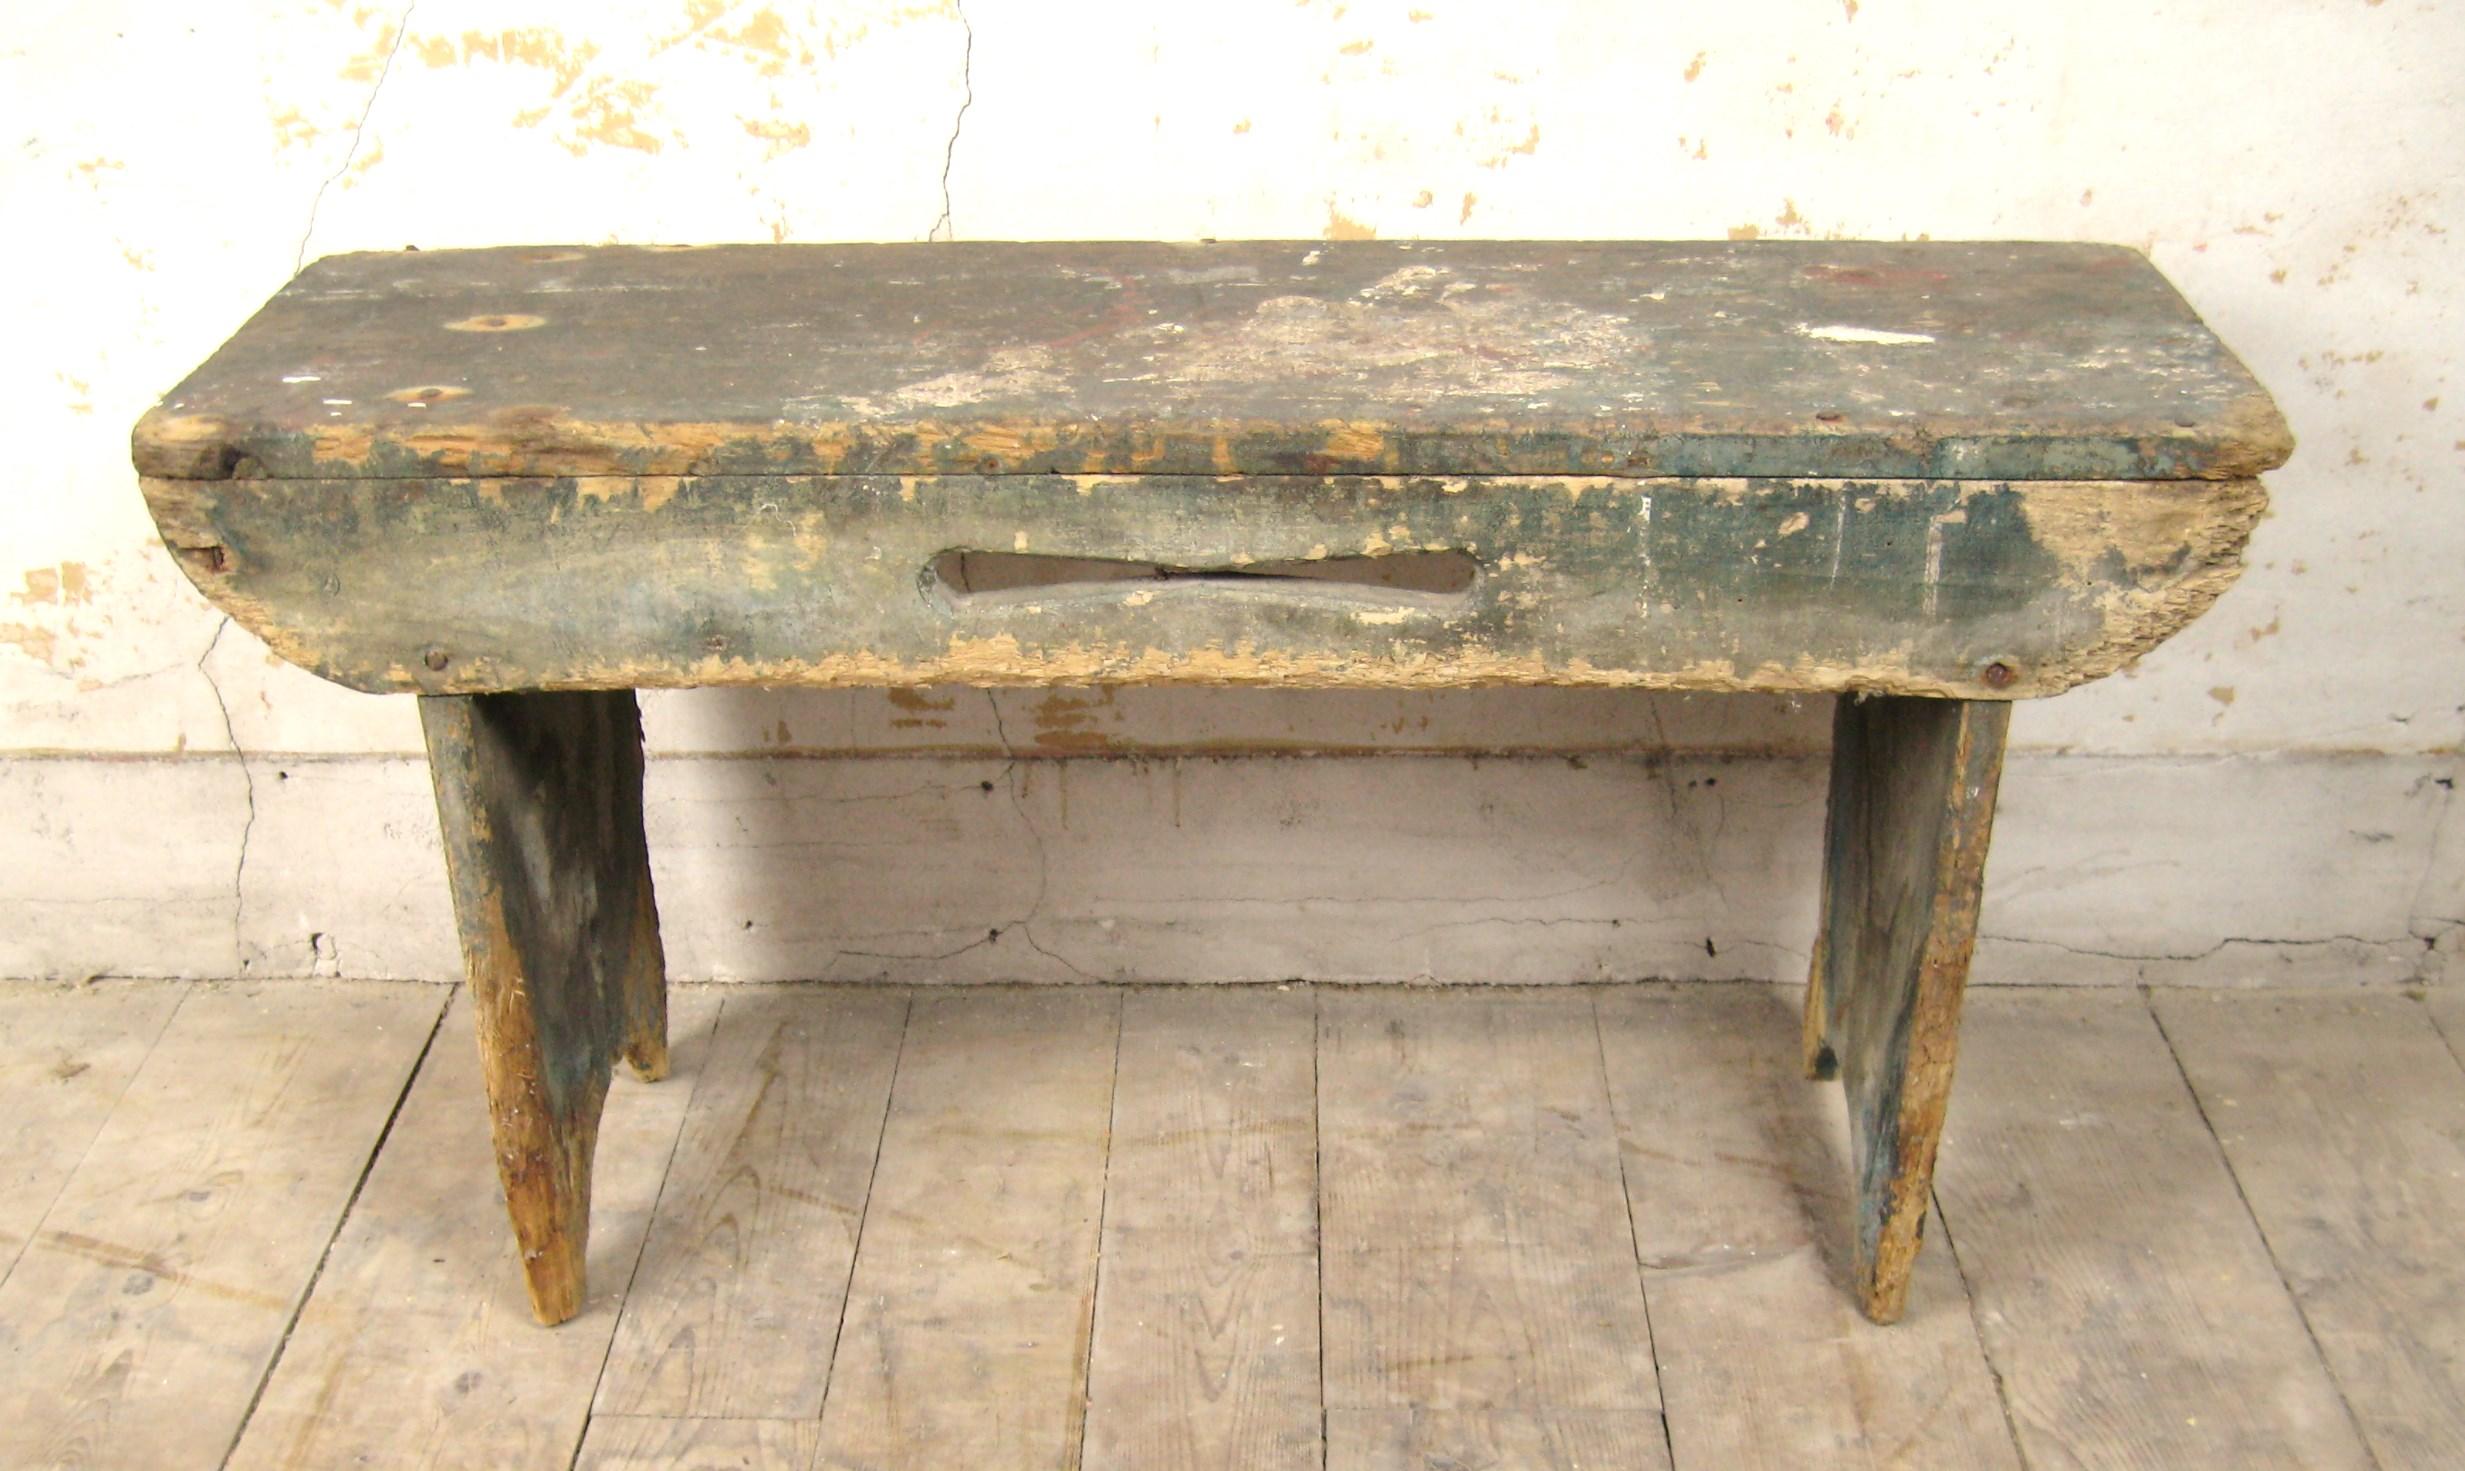 1930's Original Barn Bench with original paint that has not been touched in many years. Please look at the photos, it has an unusual cut out and boot jack feet. It also has remnants of many many years of work in someone’s barn. Has paint splatter,